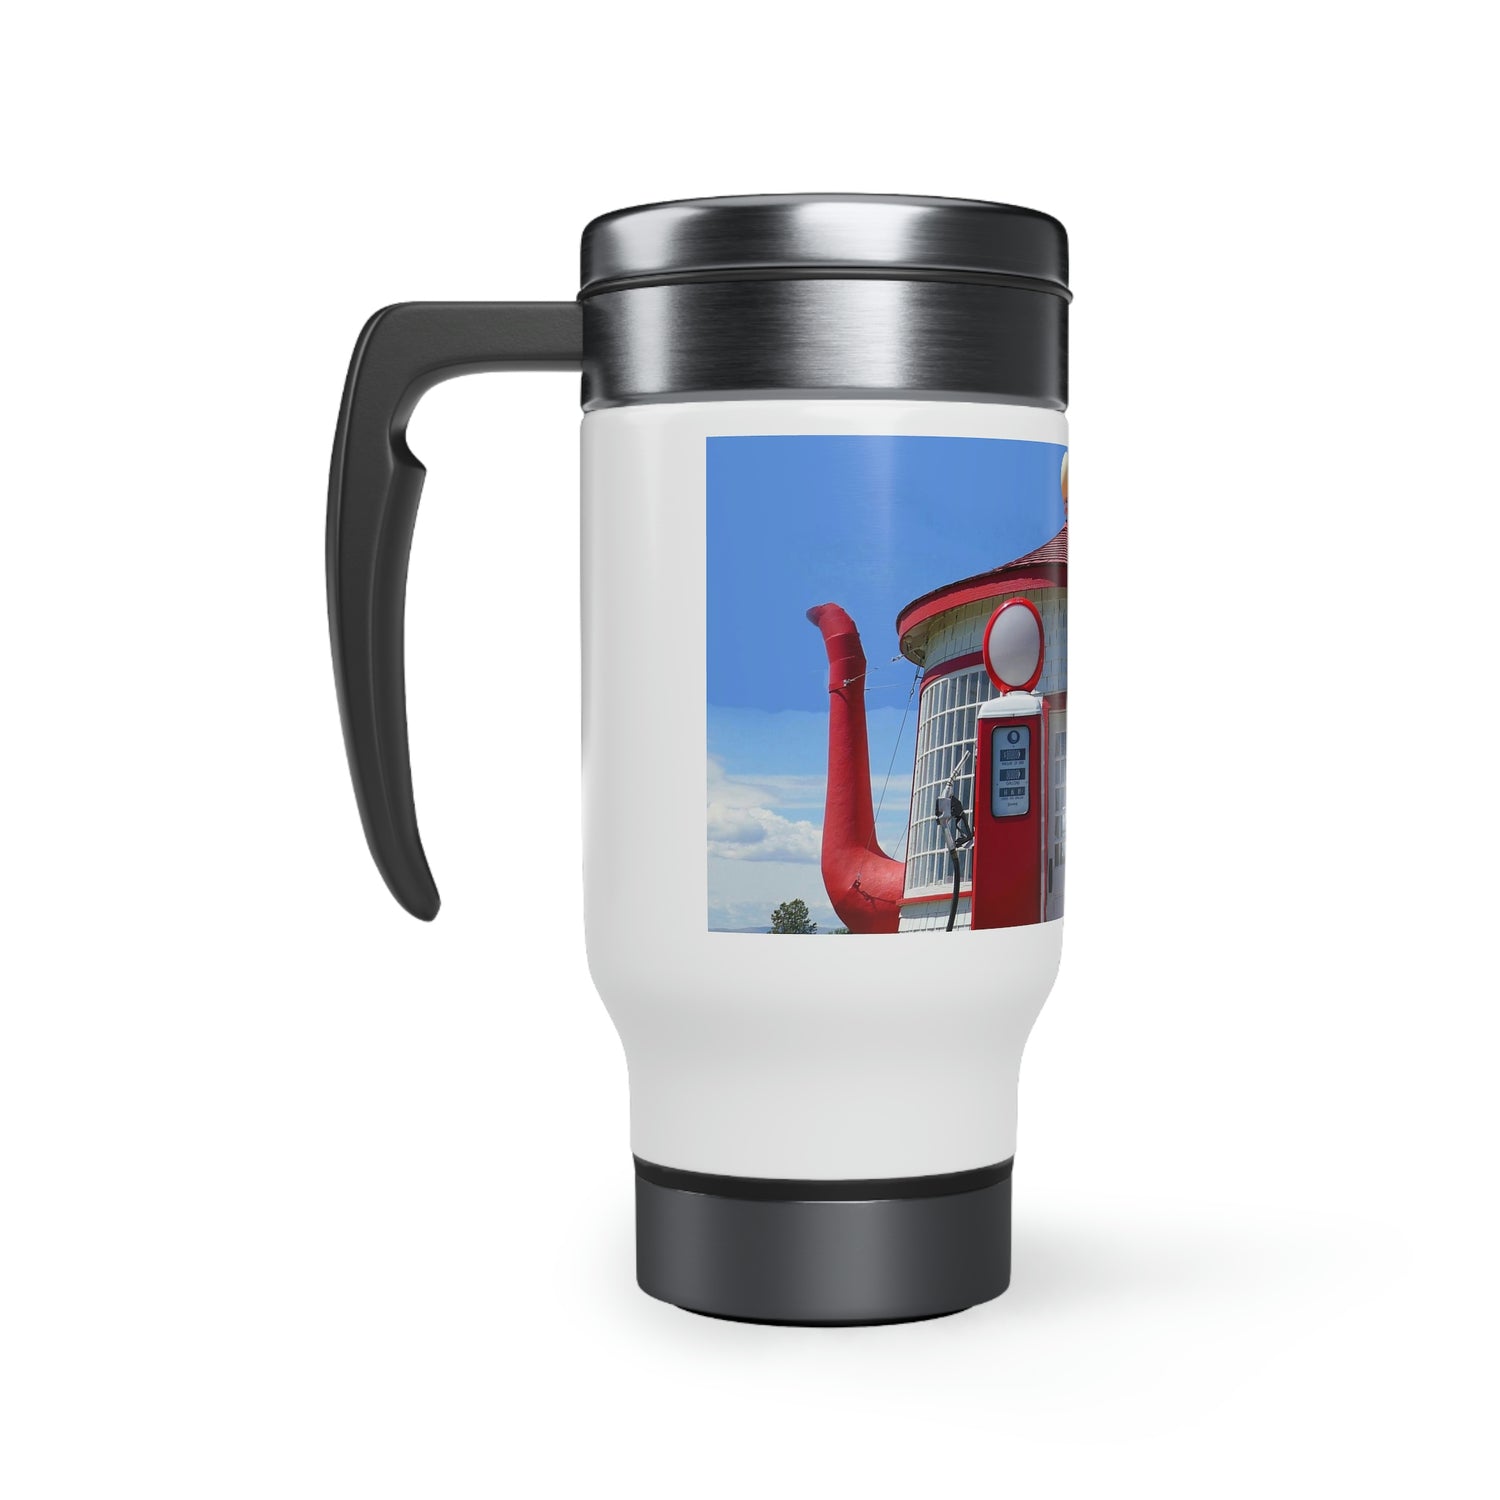 Awesome Teapot Dome Service Station  - Stainless Steel Travel Mug with Handle, 14oz - Fry1Productions